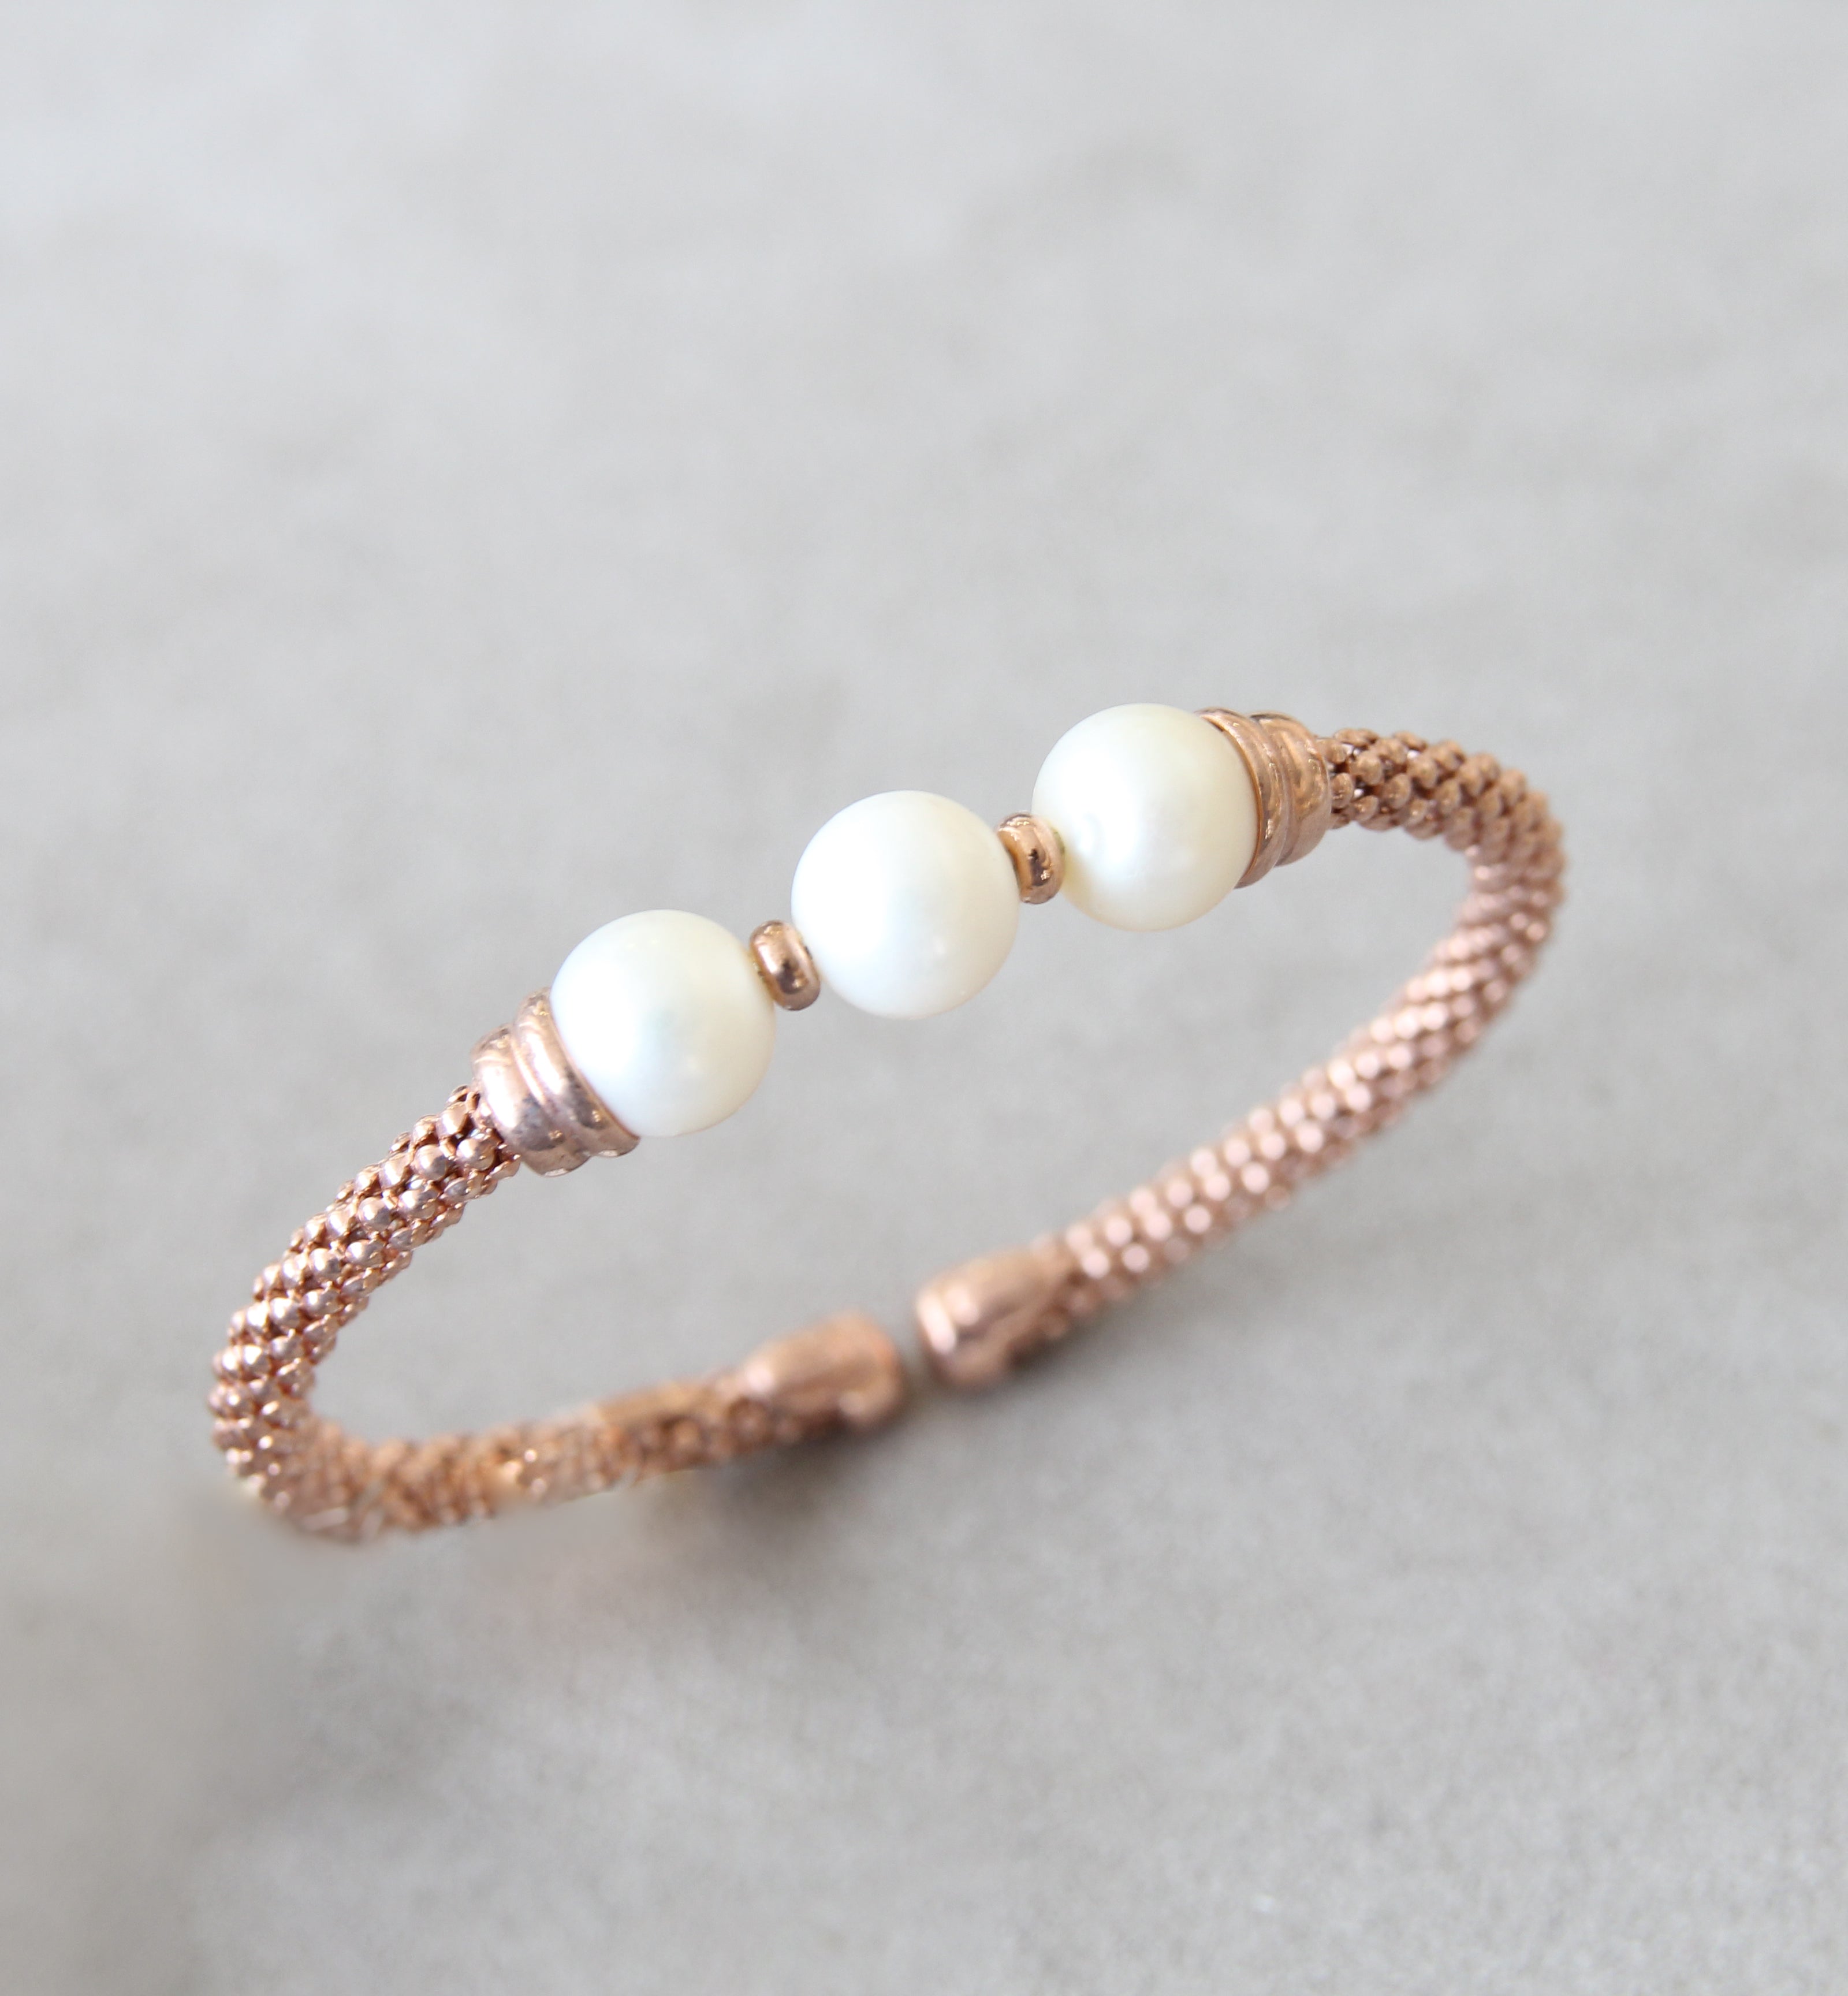 Silver 925 Bangle with Cultured Pearls